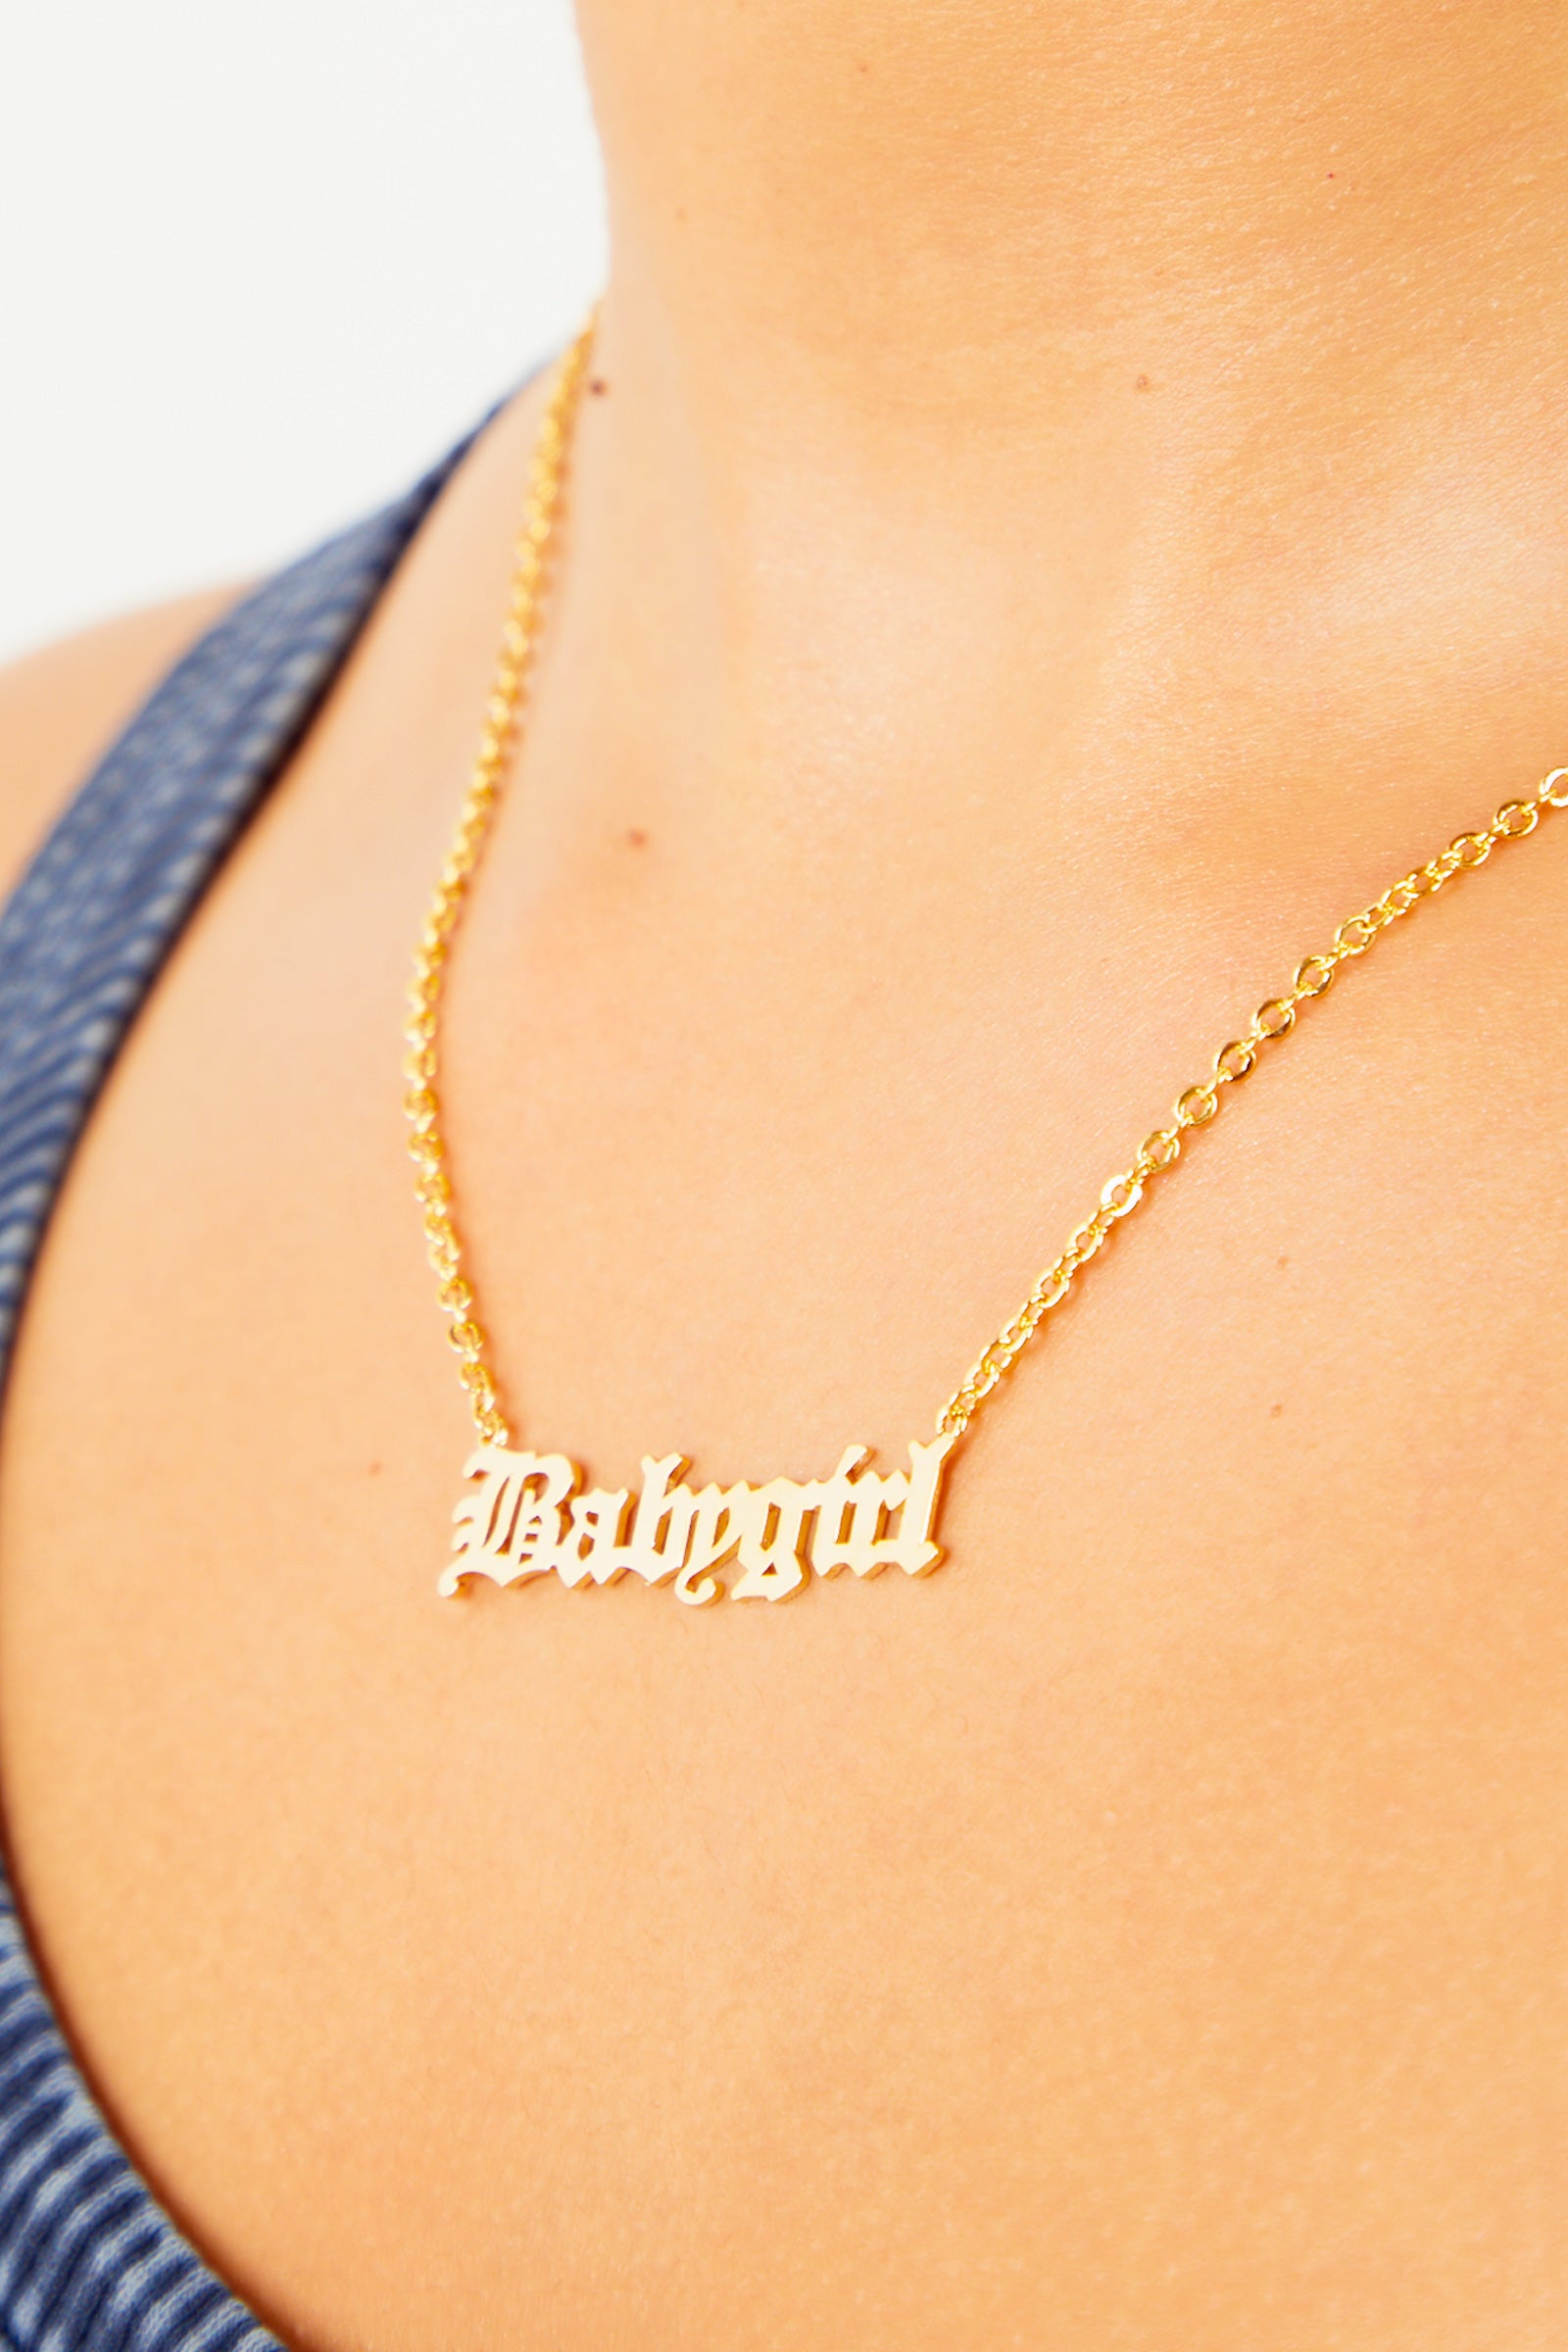 BabyGirl Gold Necklace, Baby Girl Necklace Rustic Script Large Baby Name  Pendant | eBay